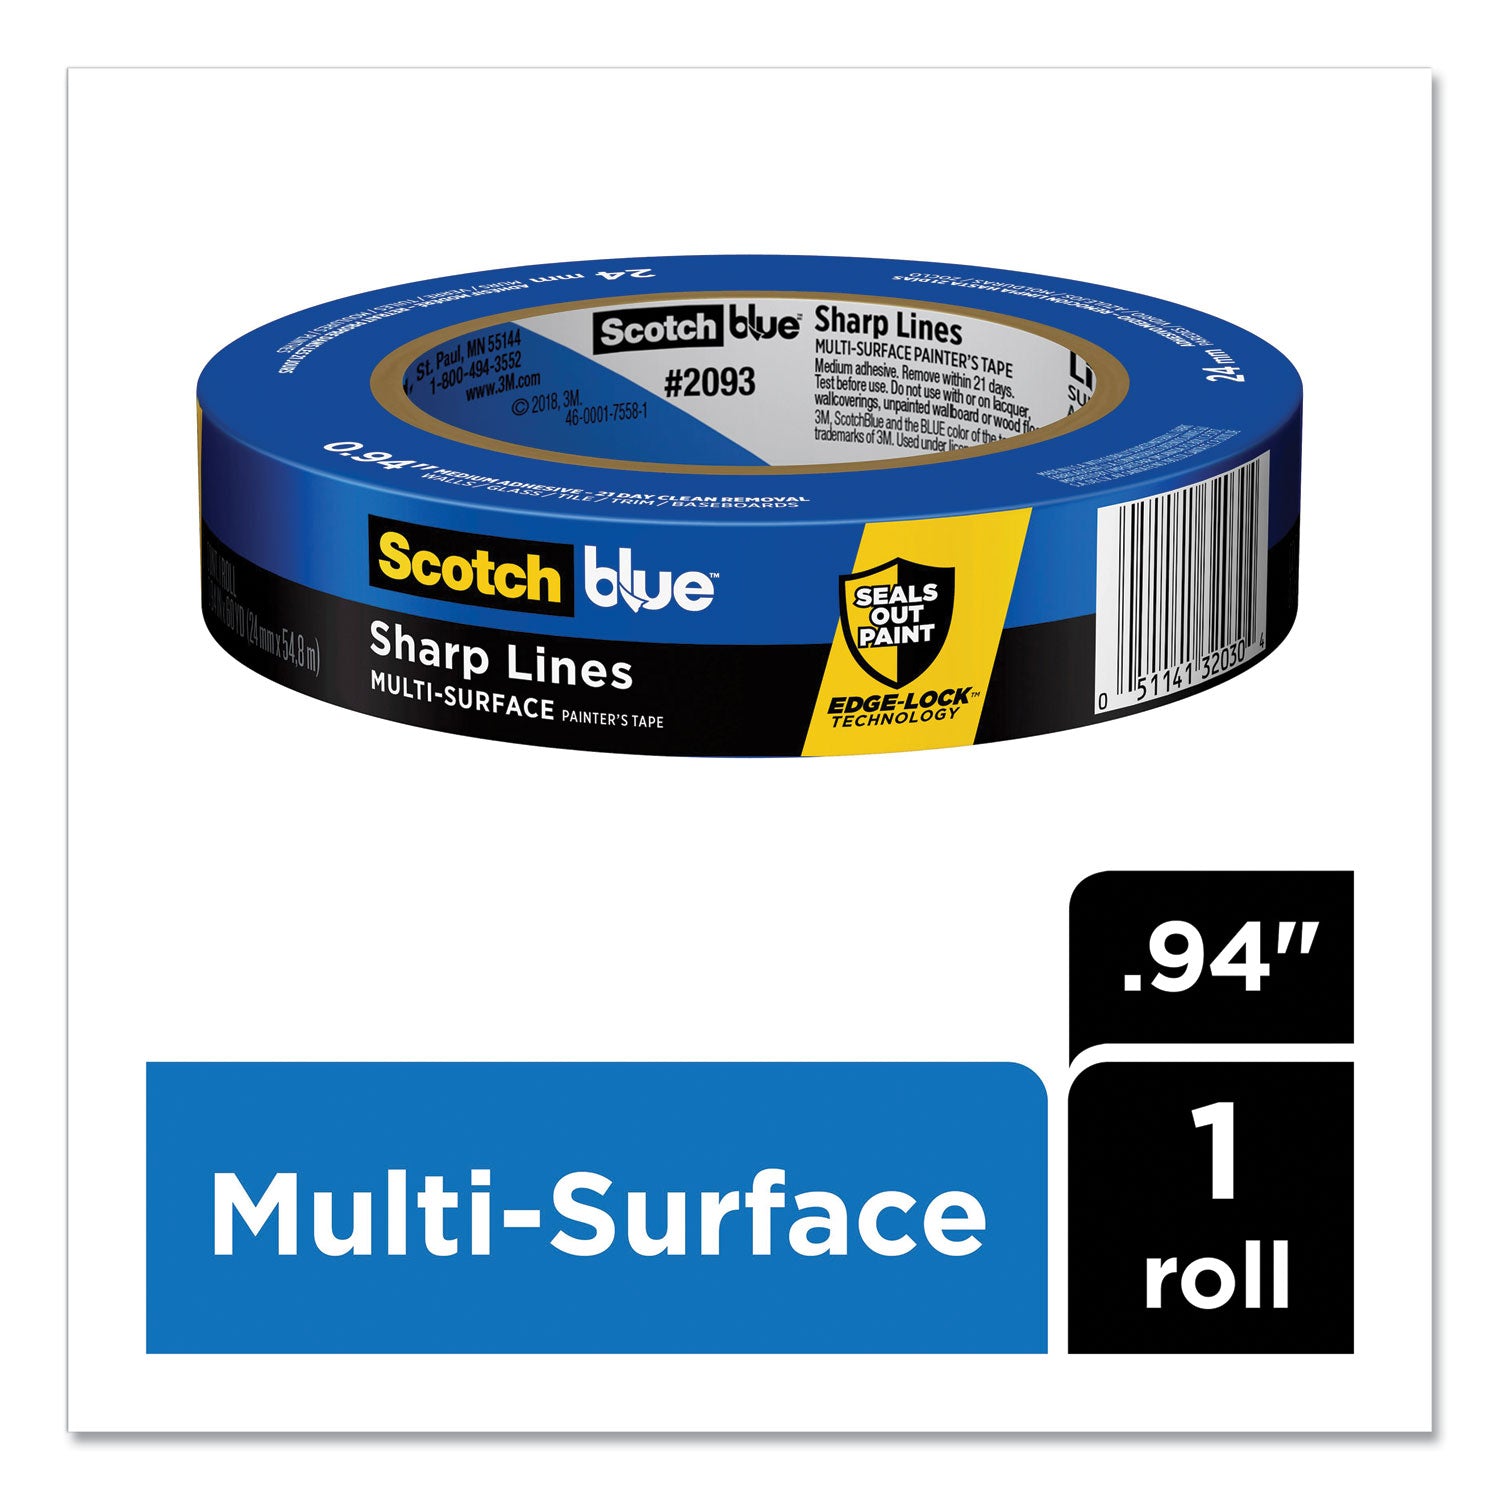 sharp-lines-multi-surface-painters-tape-3-core-094-x-60-yds-blue_mmm70006578119 - 2